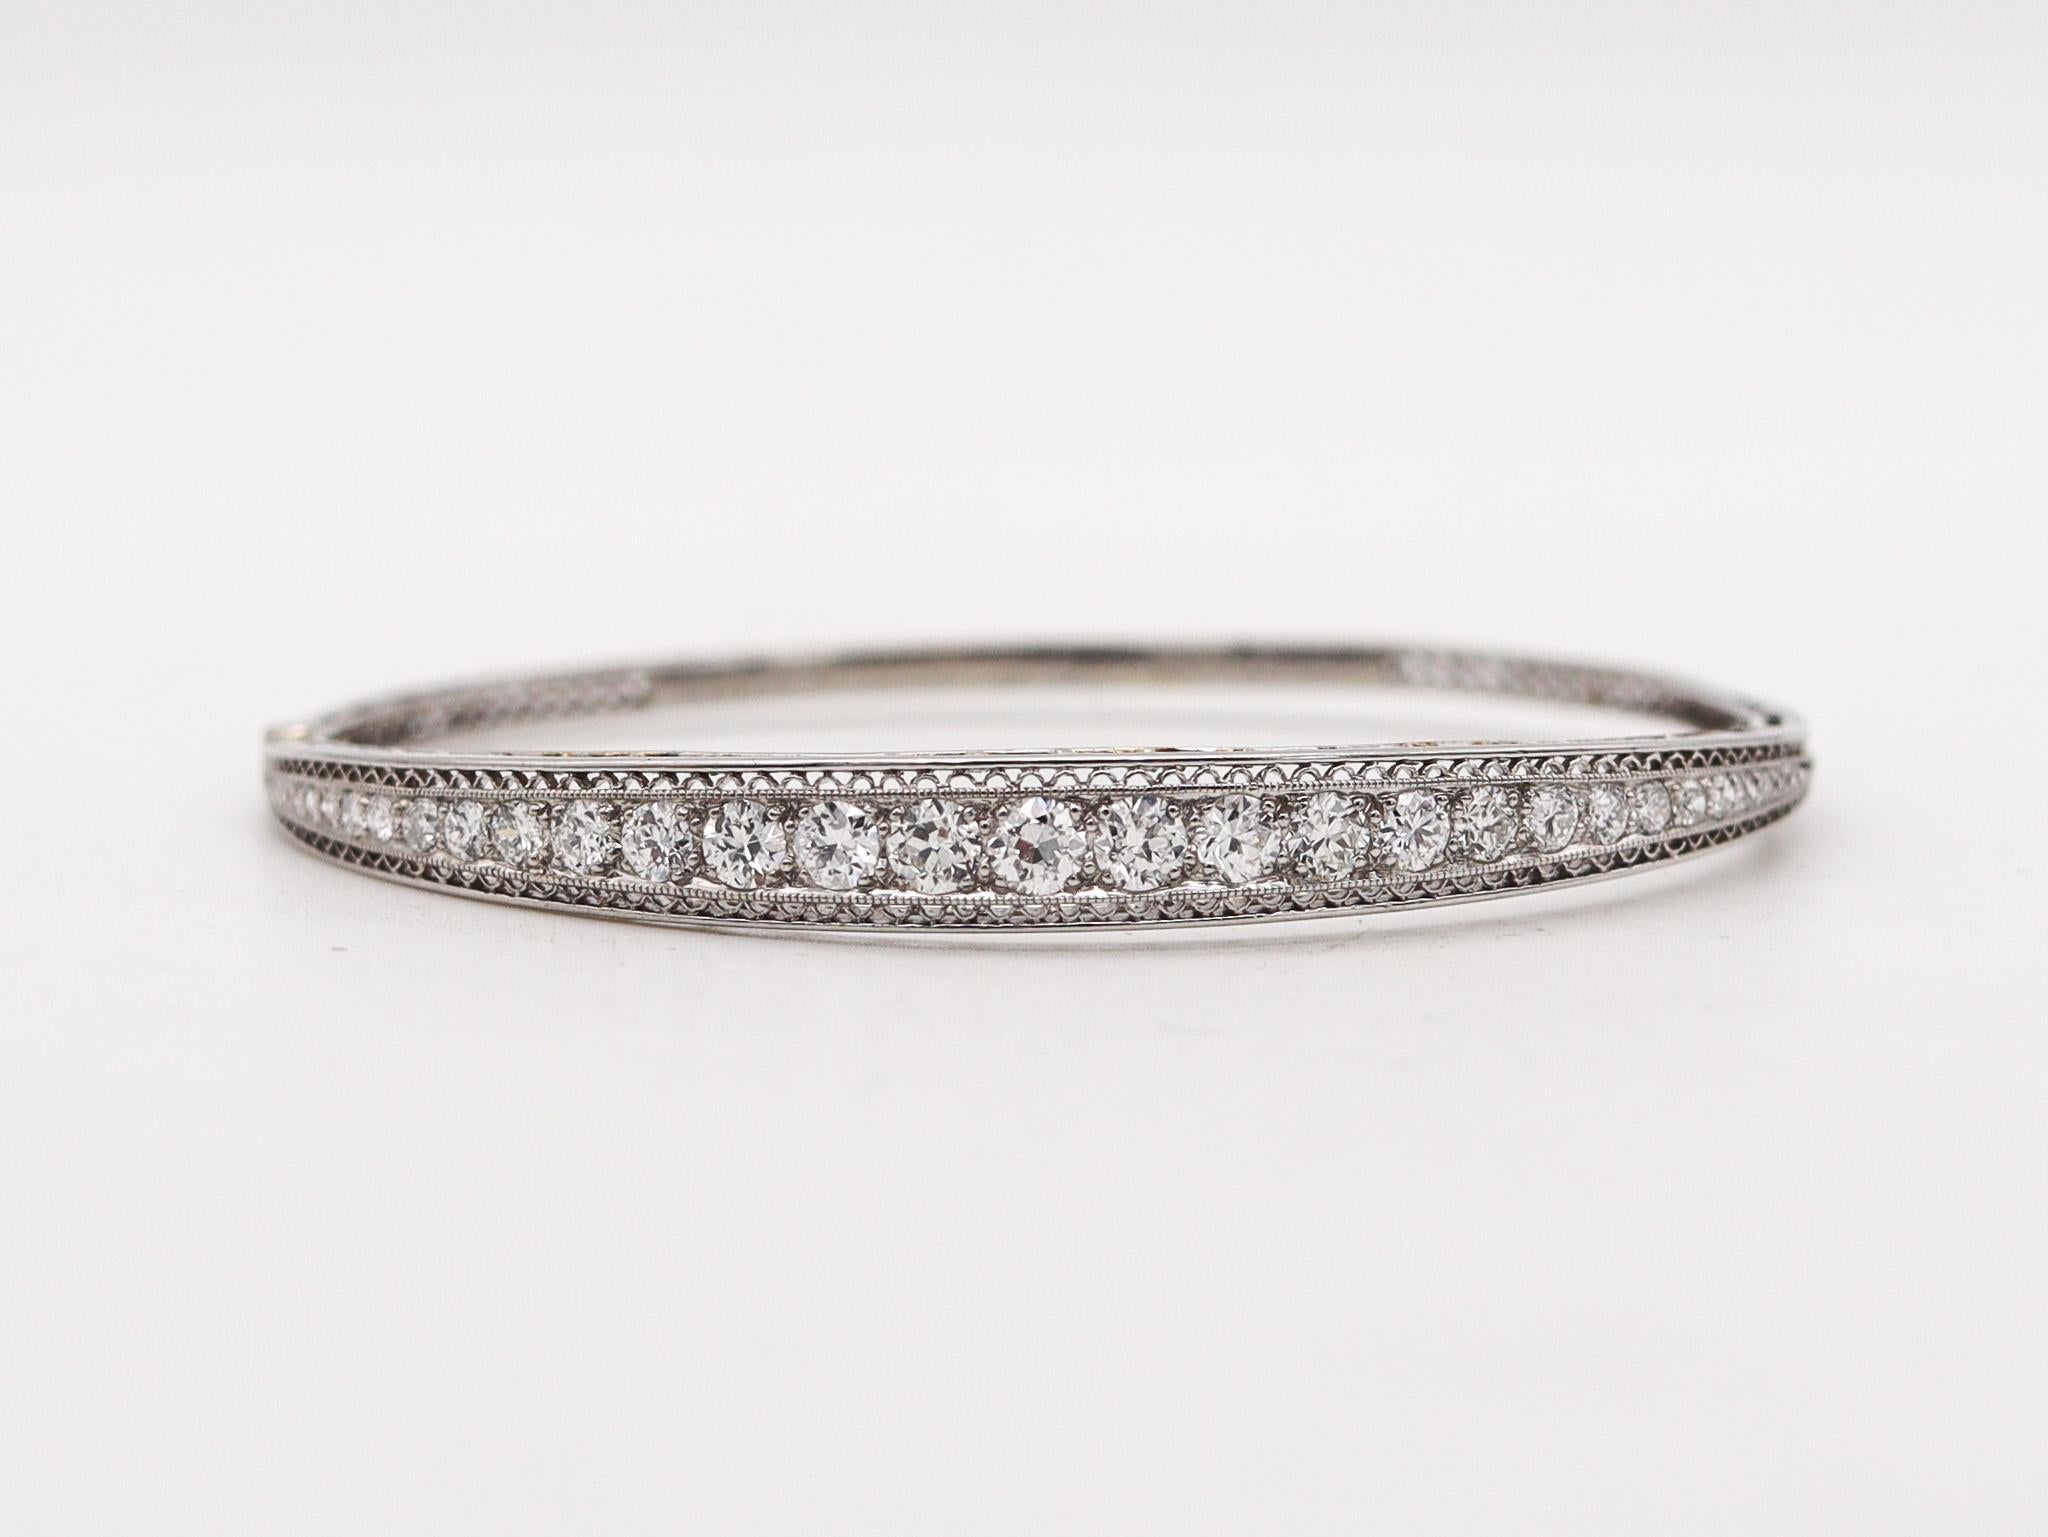 Old European Cut Marcus & Co. 1910 Edwardian Bangle Bracelet In Platinum With 3.16 Ctw In Diamond For Sale